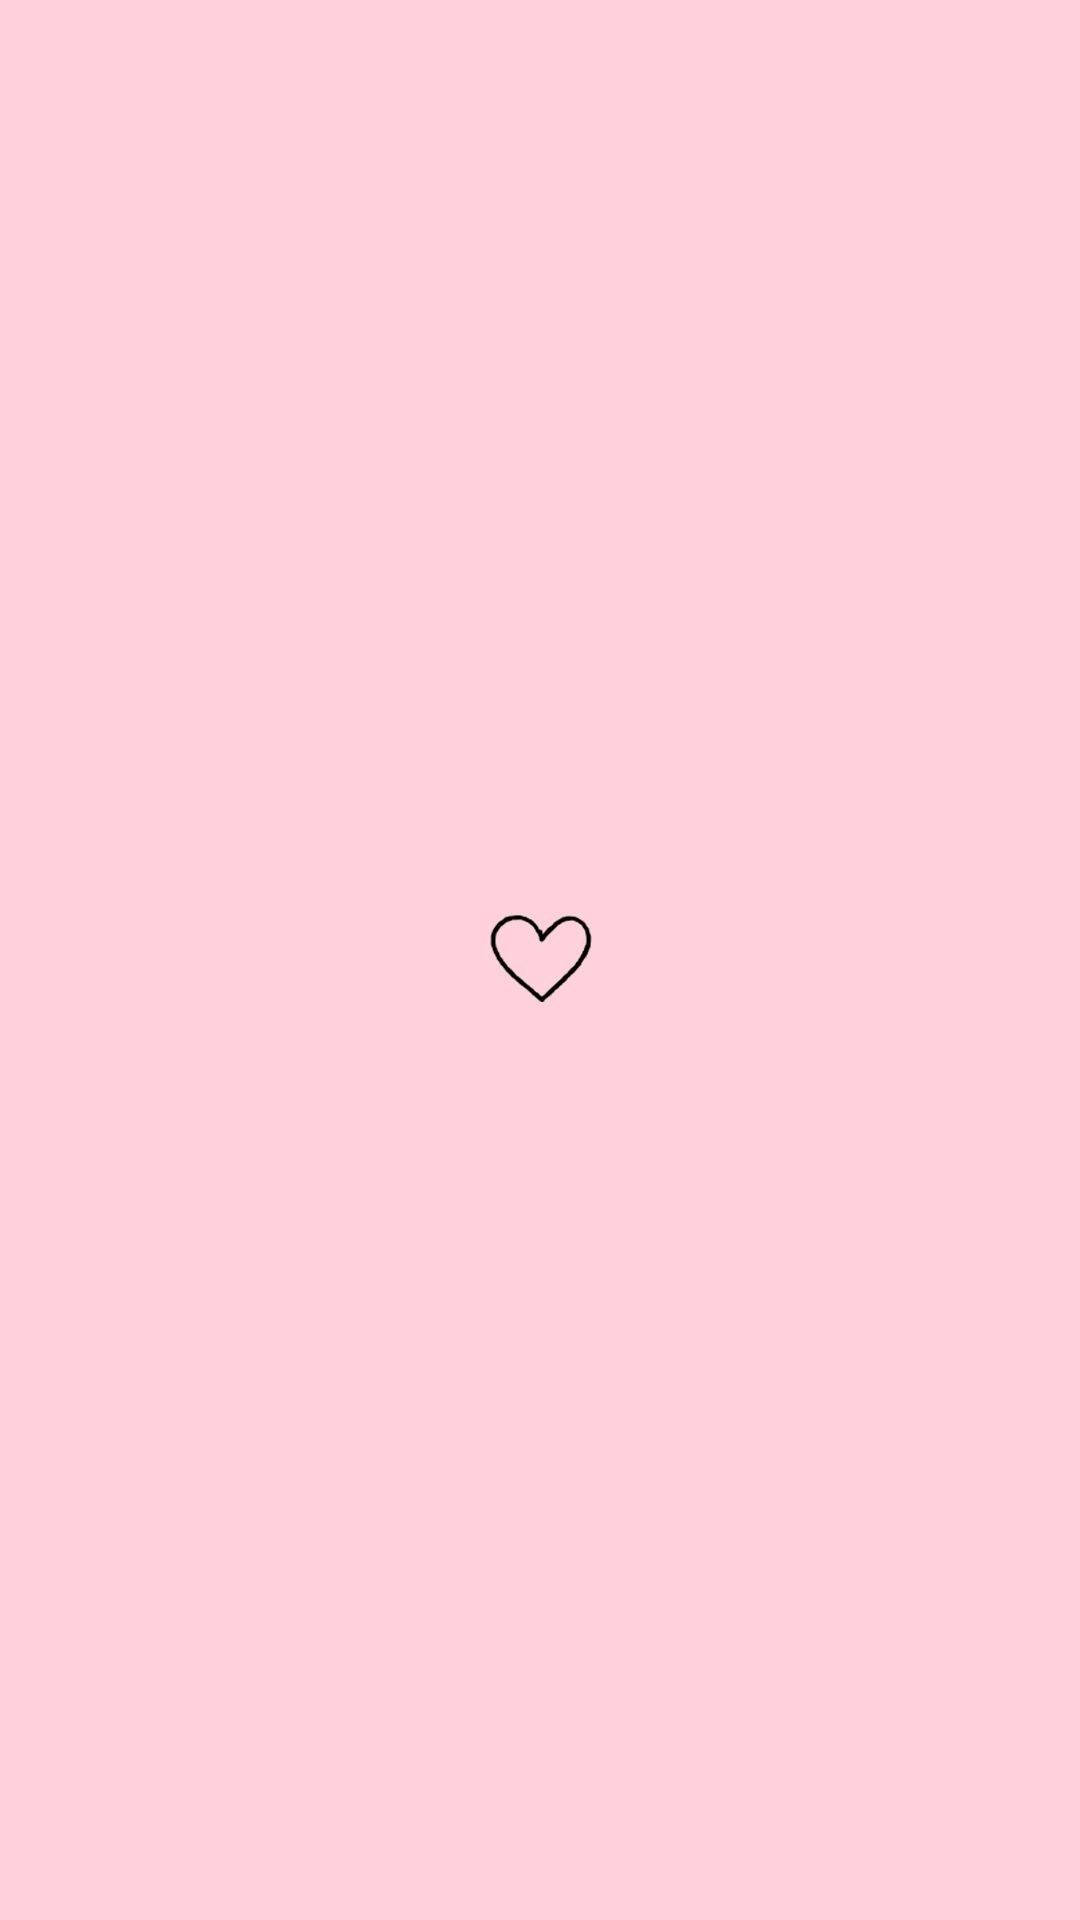 Cute Instagram Background With Heart Background